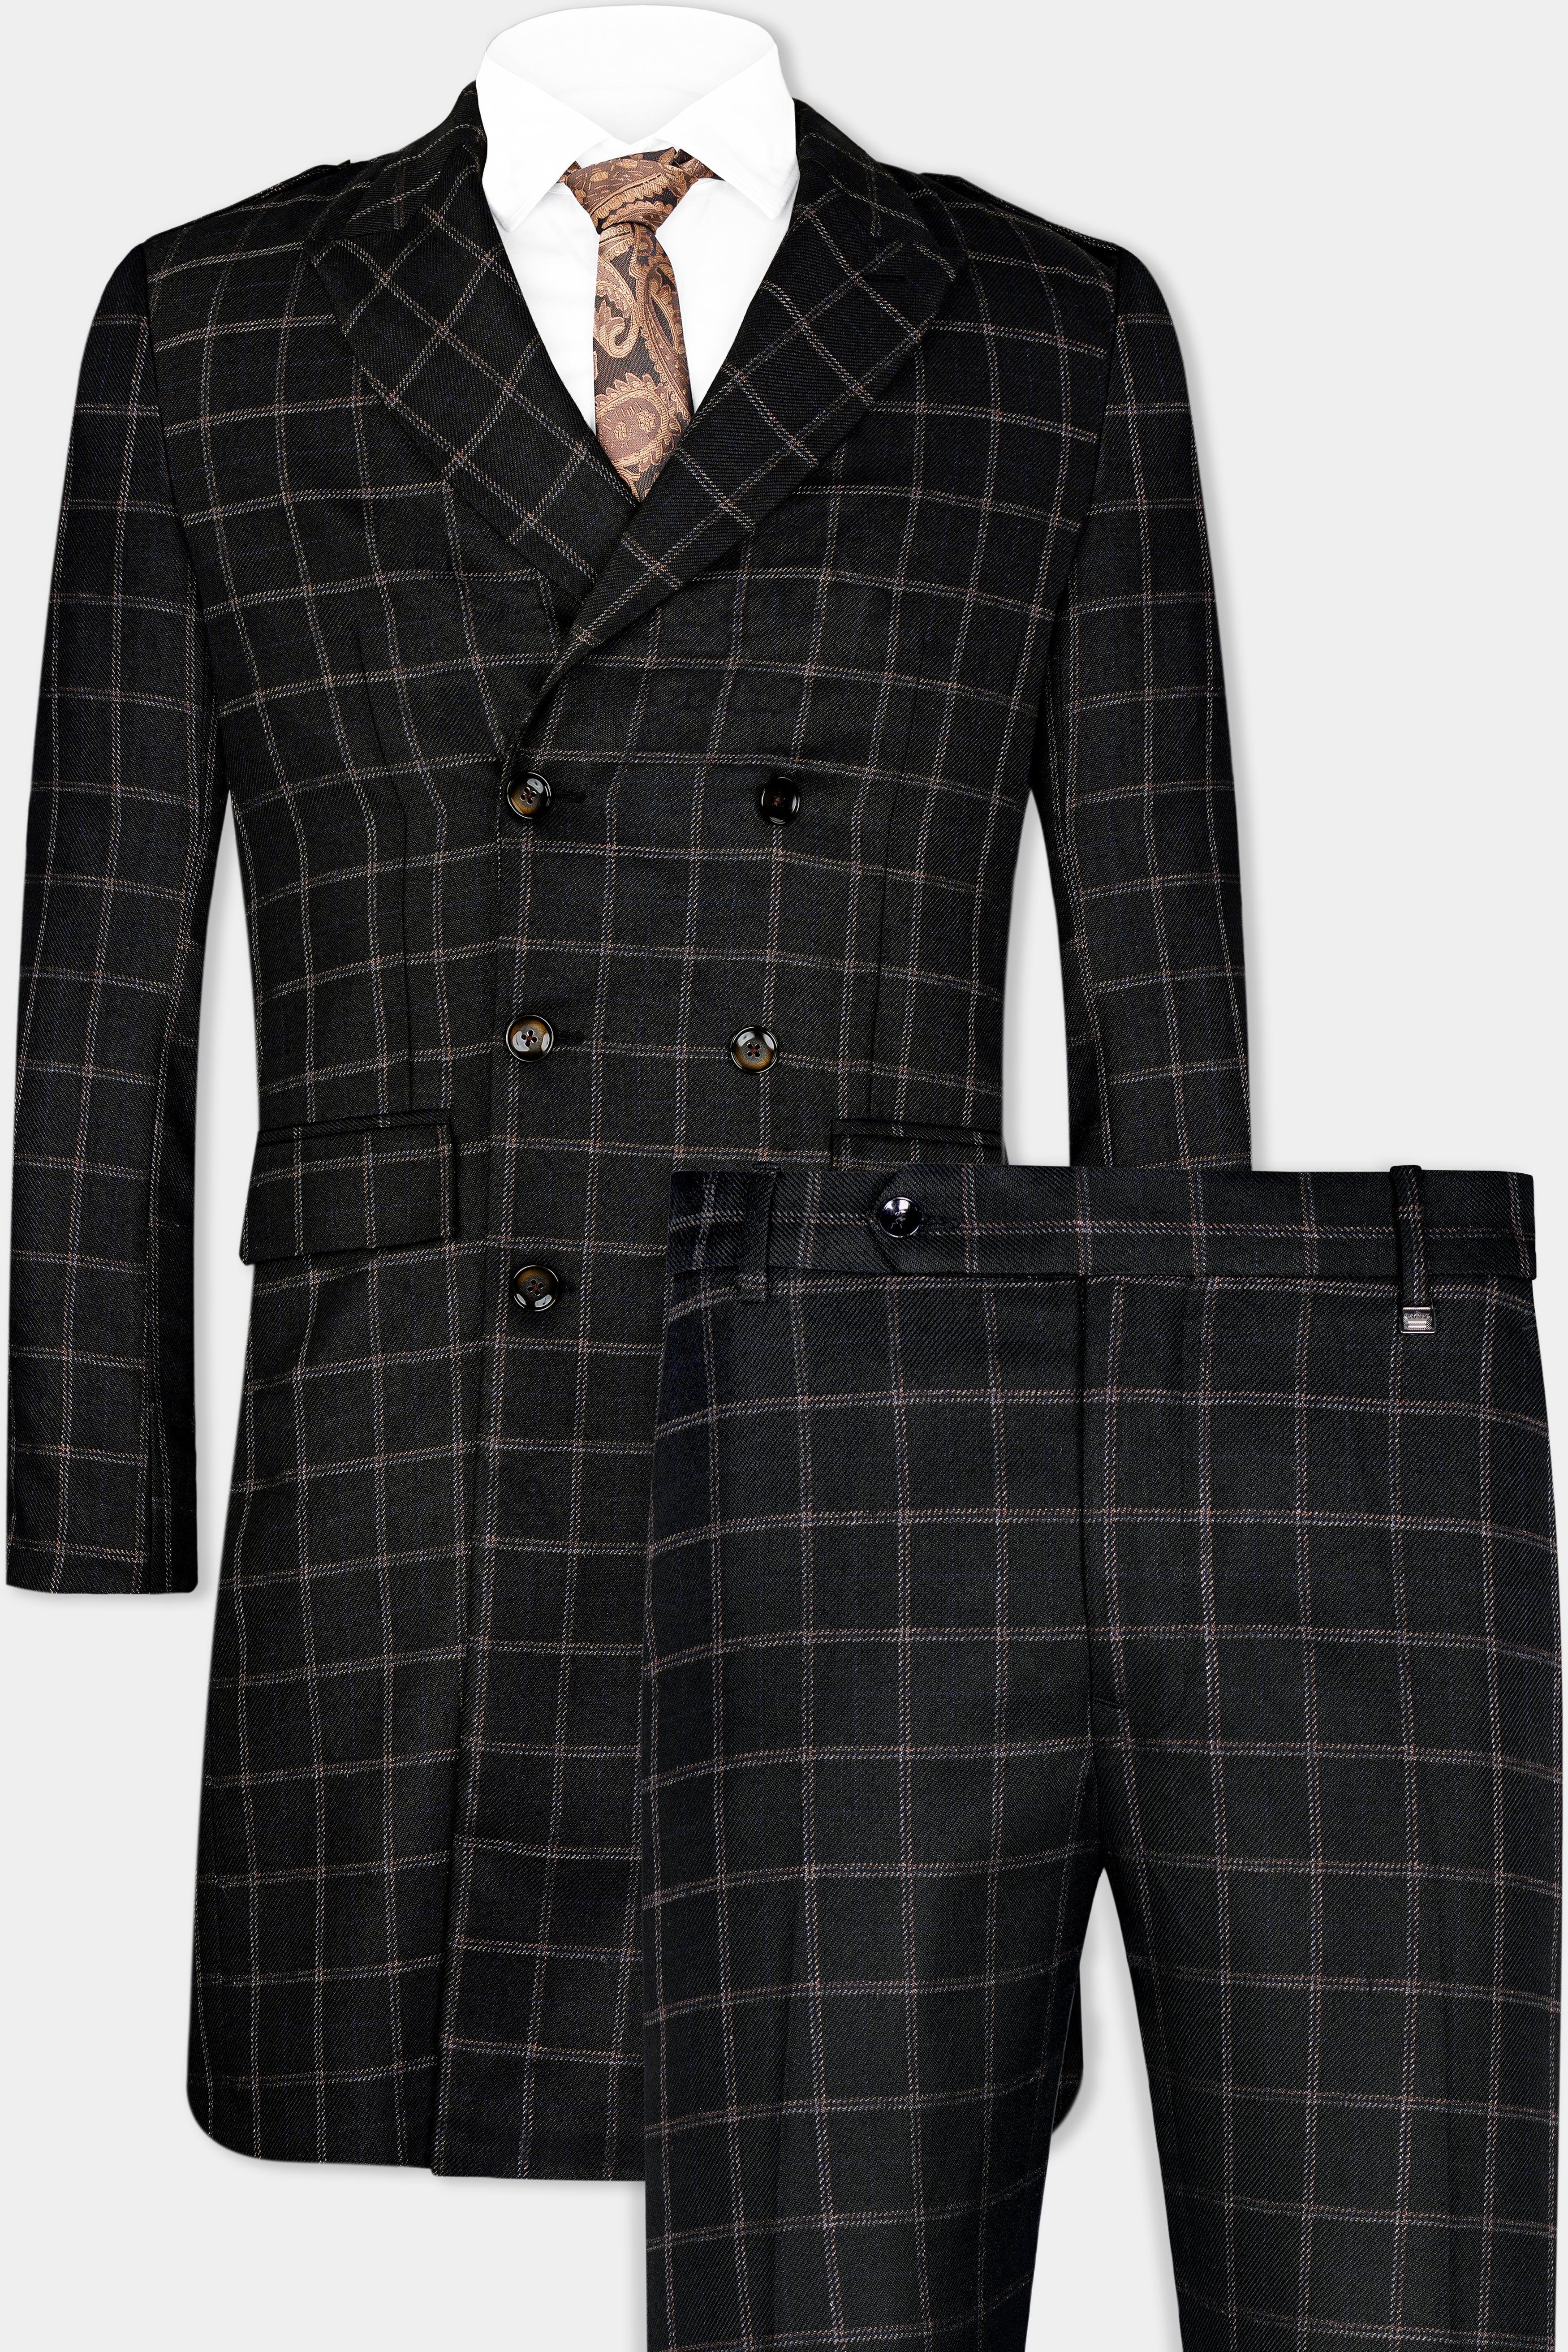 Jade Black and Saddle Brown Windowpane Tweed Trench Coat With Pant TCPT2920-DB-D202-36, TCPT2920-DB-D202-38, TCPT2920-DB-D202-40, TCPT2920-DB-D202-42, TCPT2920-DB-D202-44, TCPT2920-DB-D202-46, TCPT2920-DB-D202-48, TCPT2920-DB-D202-50, TCPT2920-DB-D202-52, TCPT2920-DB-D202-54, TCPT2920-DB-D202-56, TCPT2920-DB-D202-58, TCPT2920-DB-D202-60